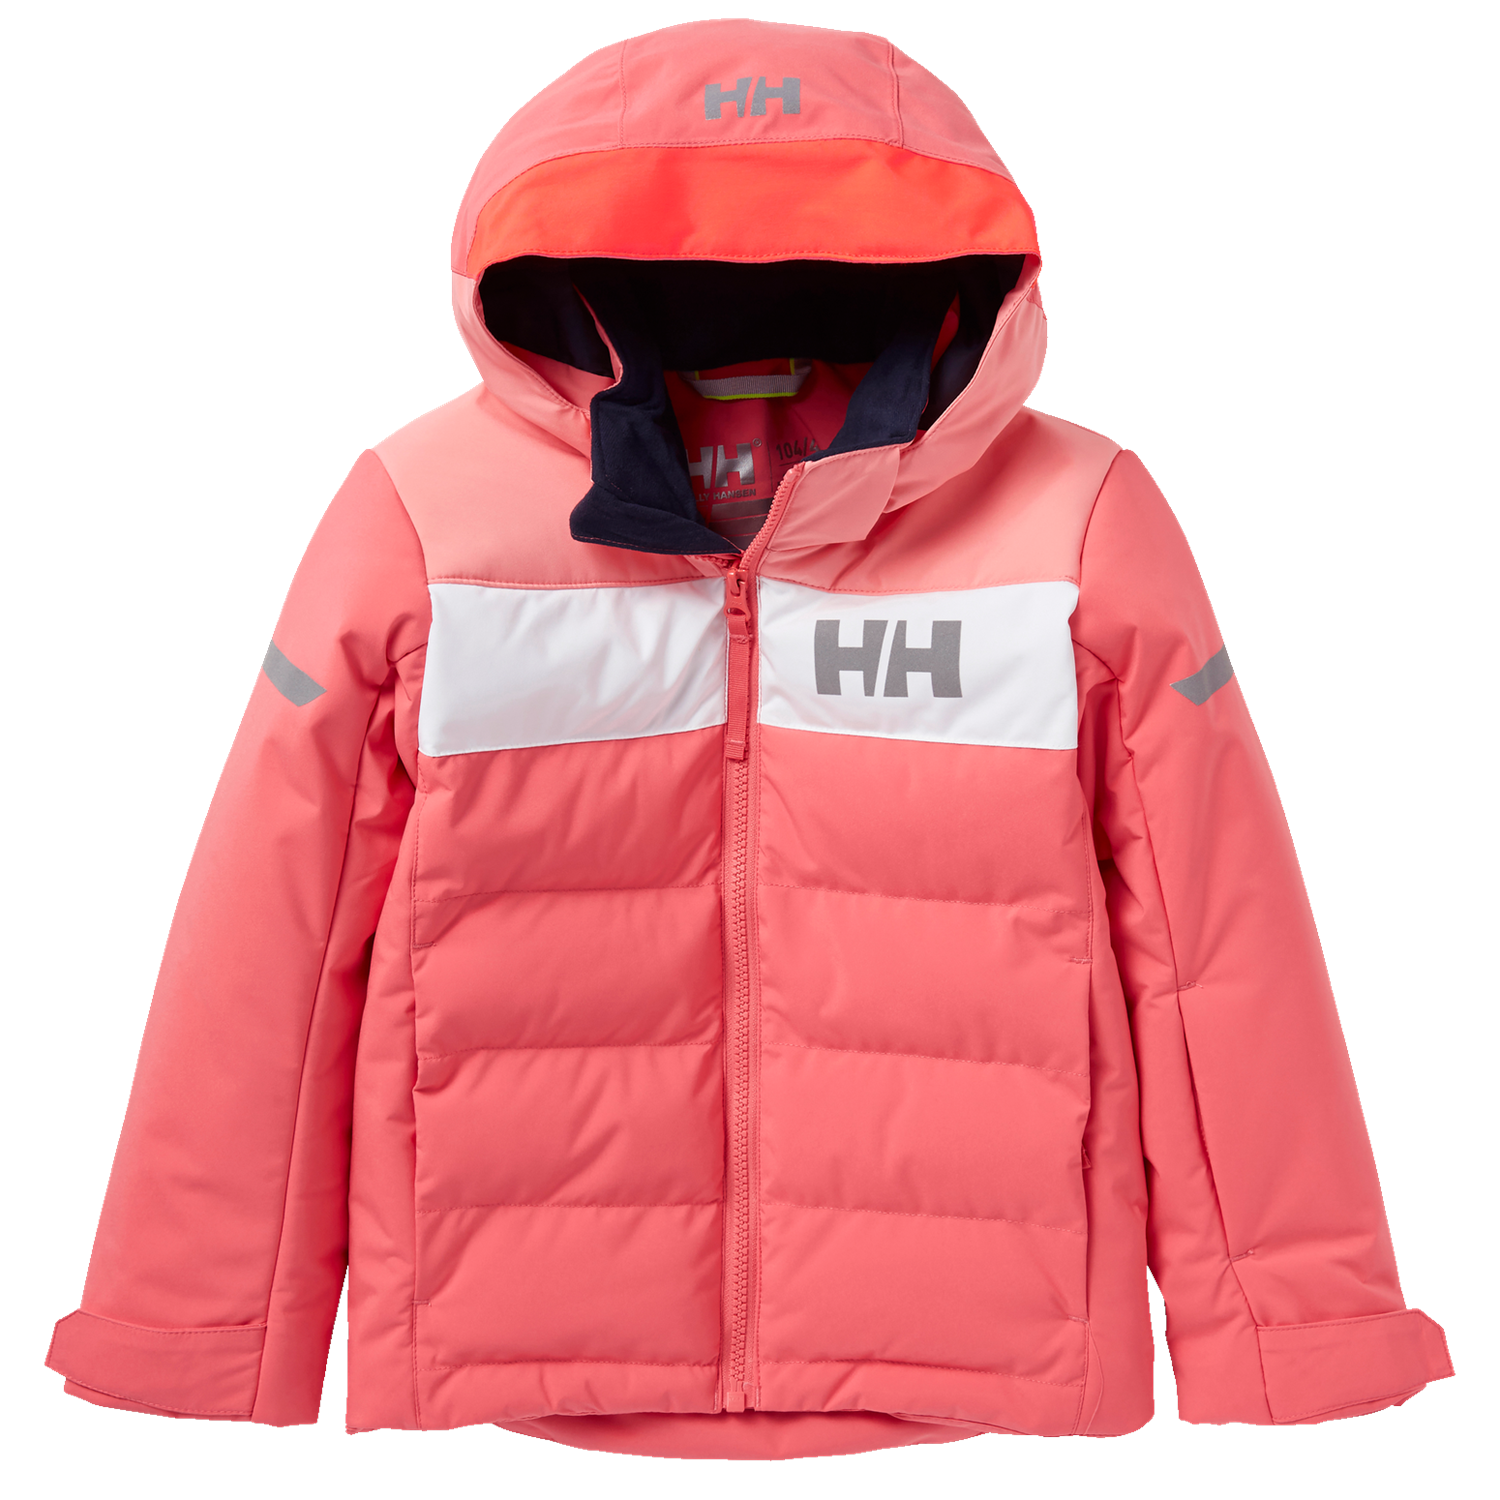 Helly Hansen Insulated Jacket - Toddlers' | evo